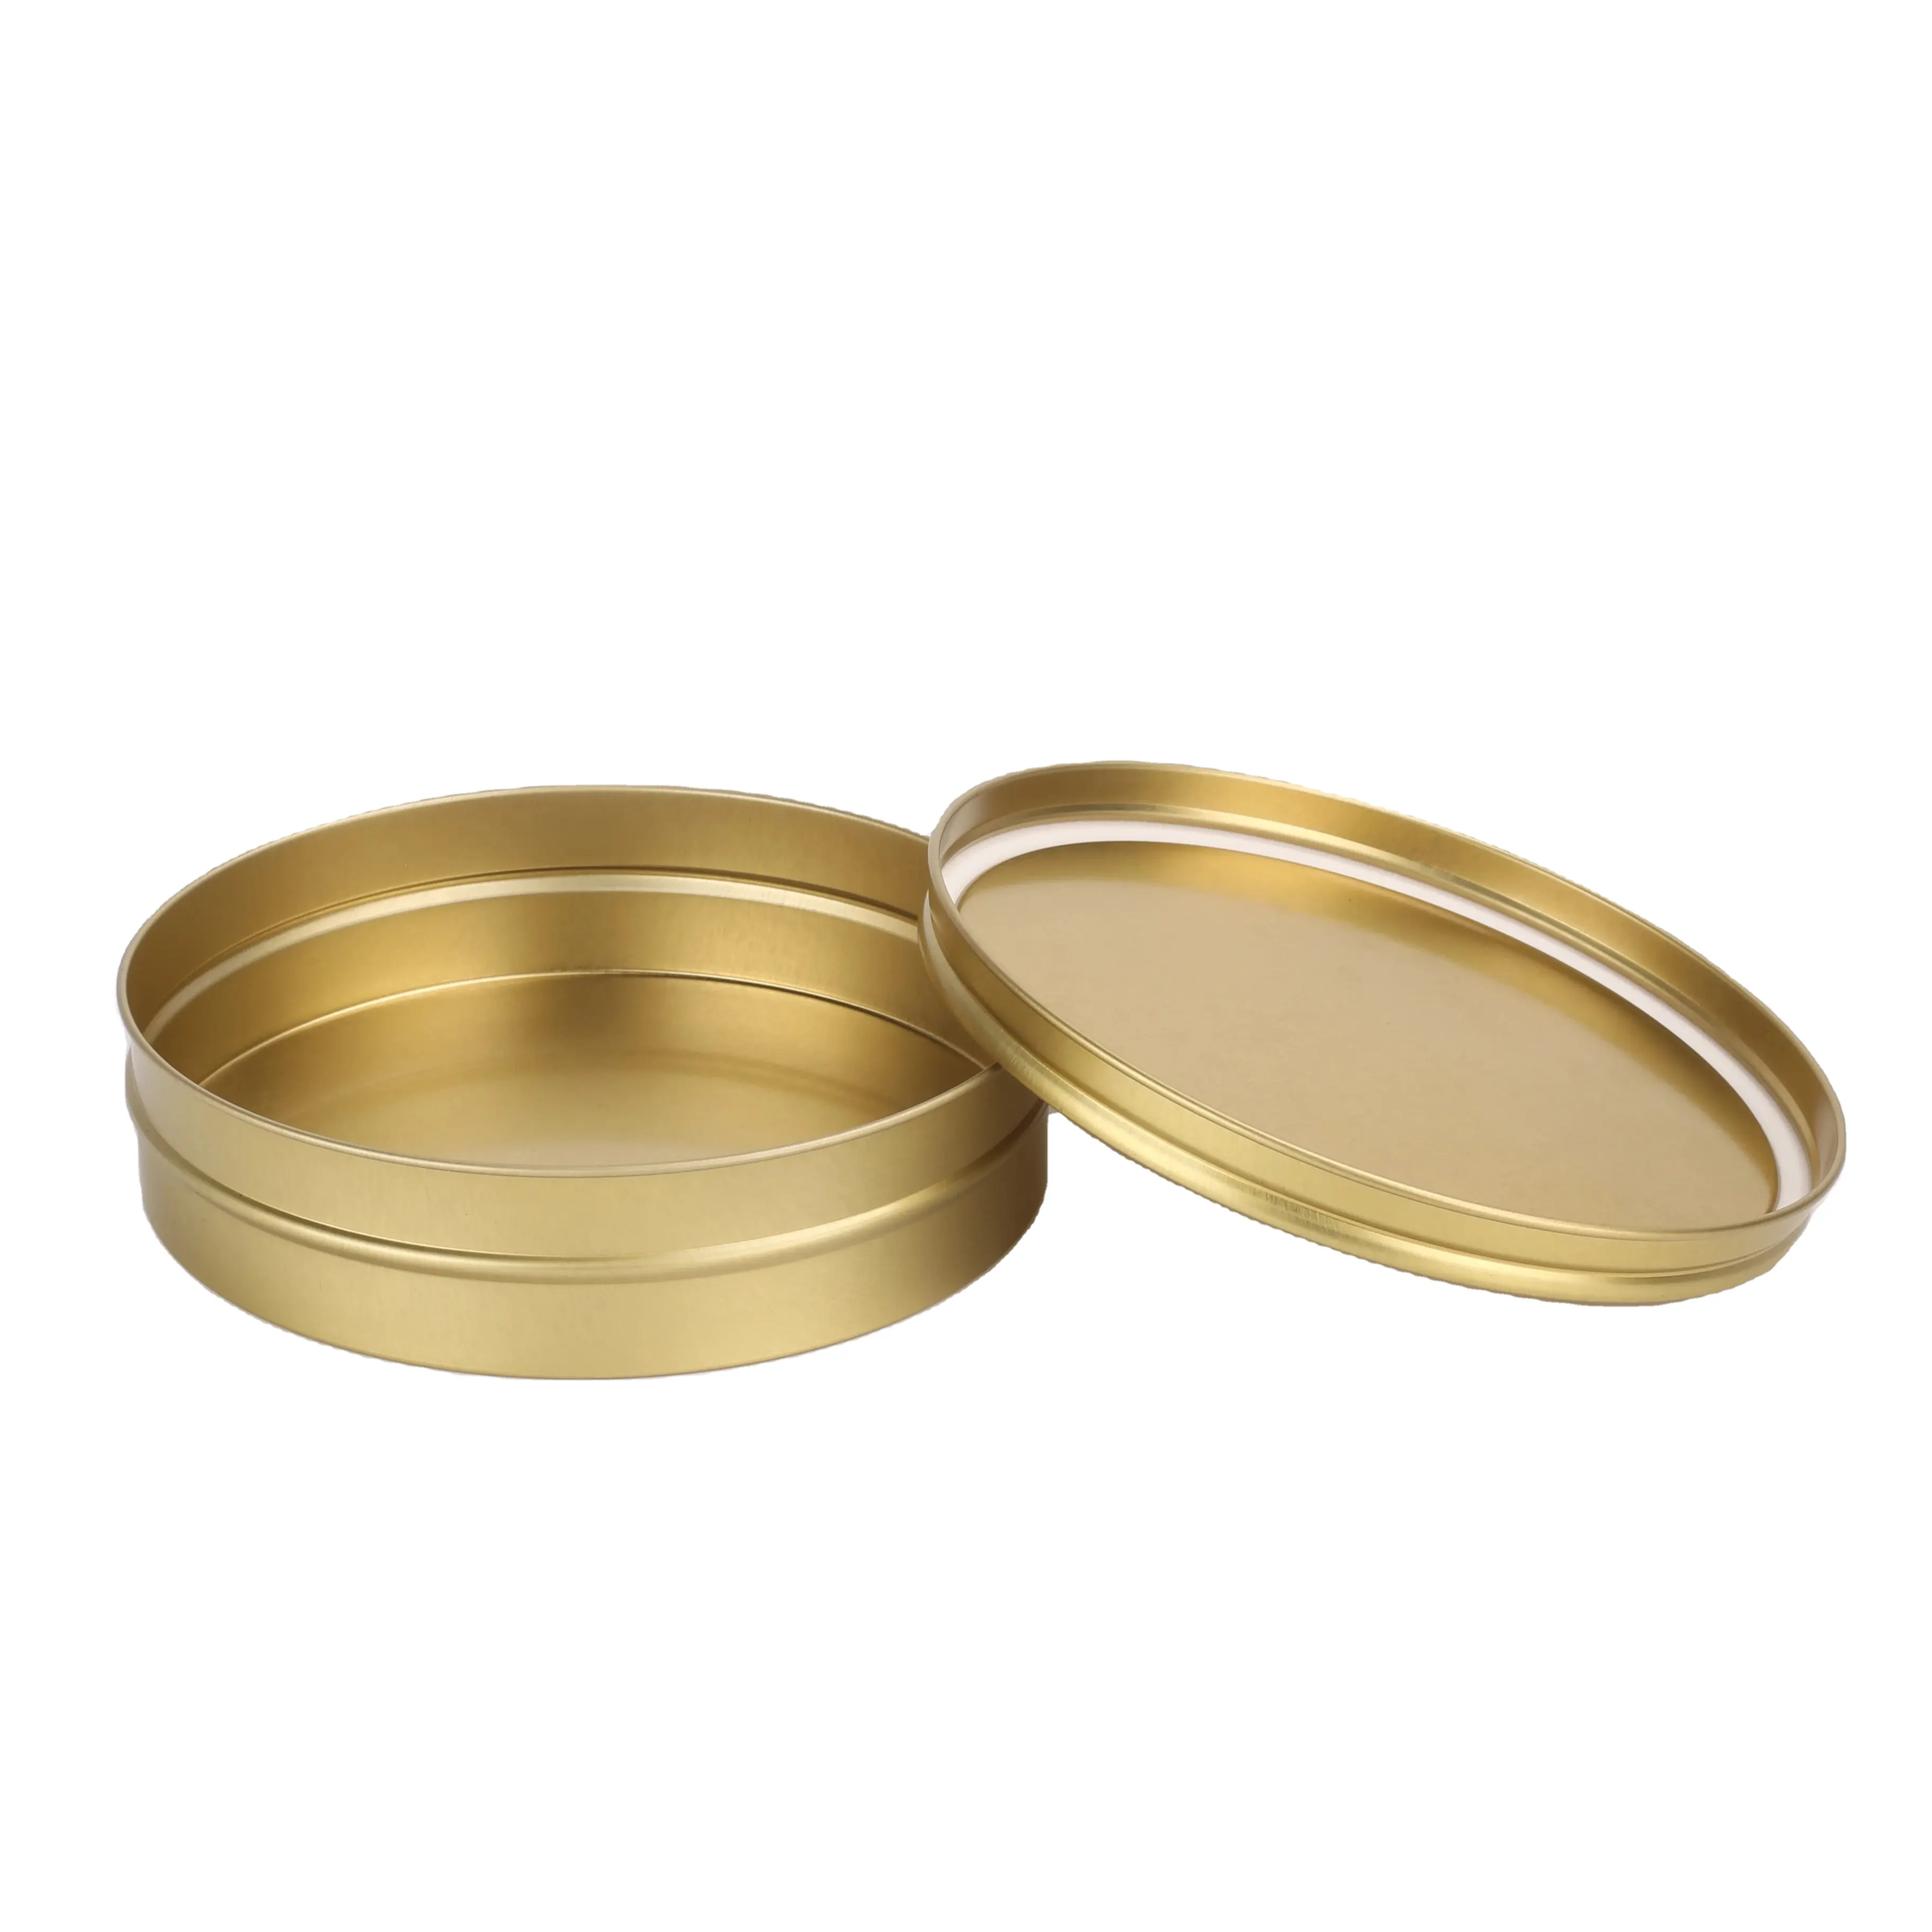 30g/50g/125g/250g/500g Factory direct whoslae food grade caviar tins in tinplate box packaging can for caviar distributors